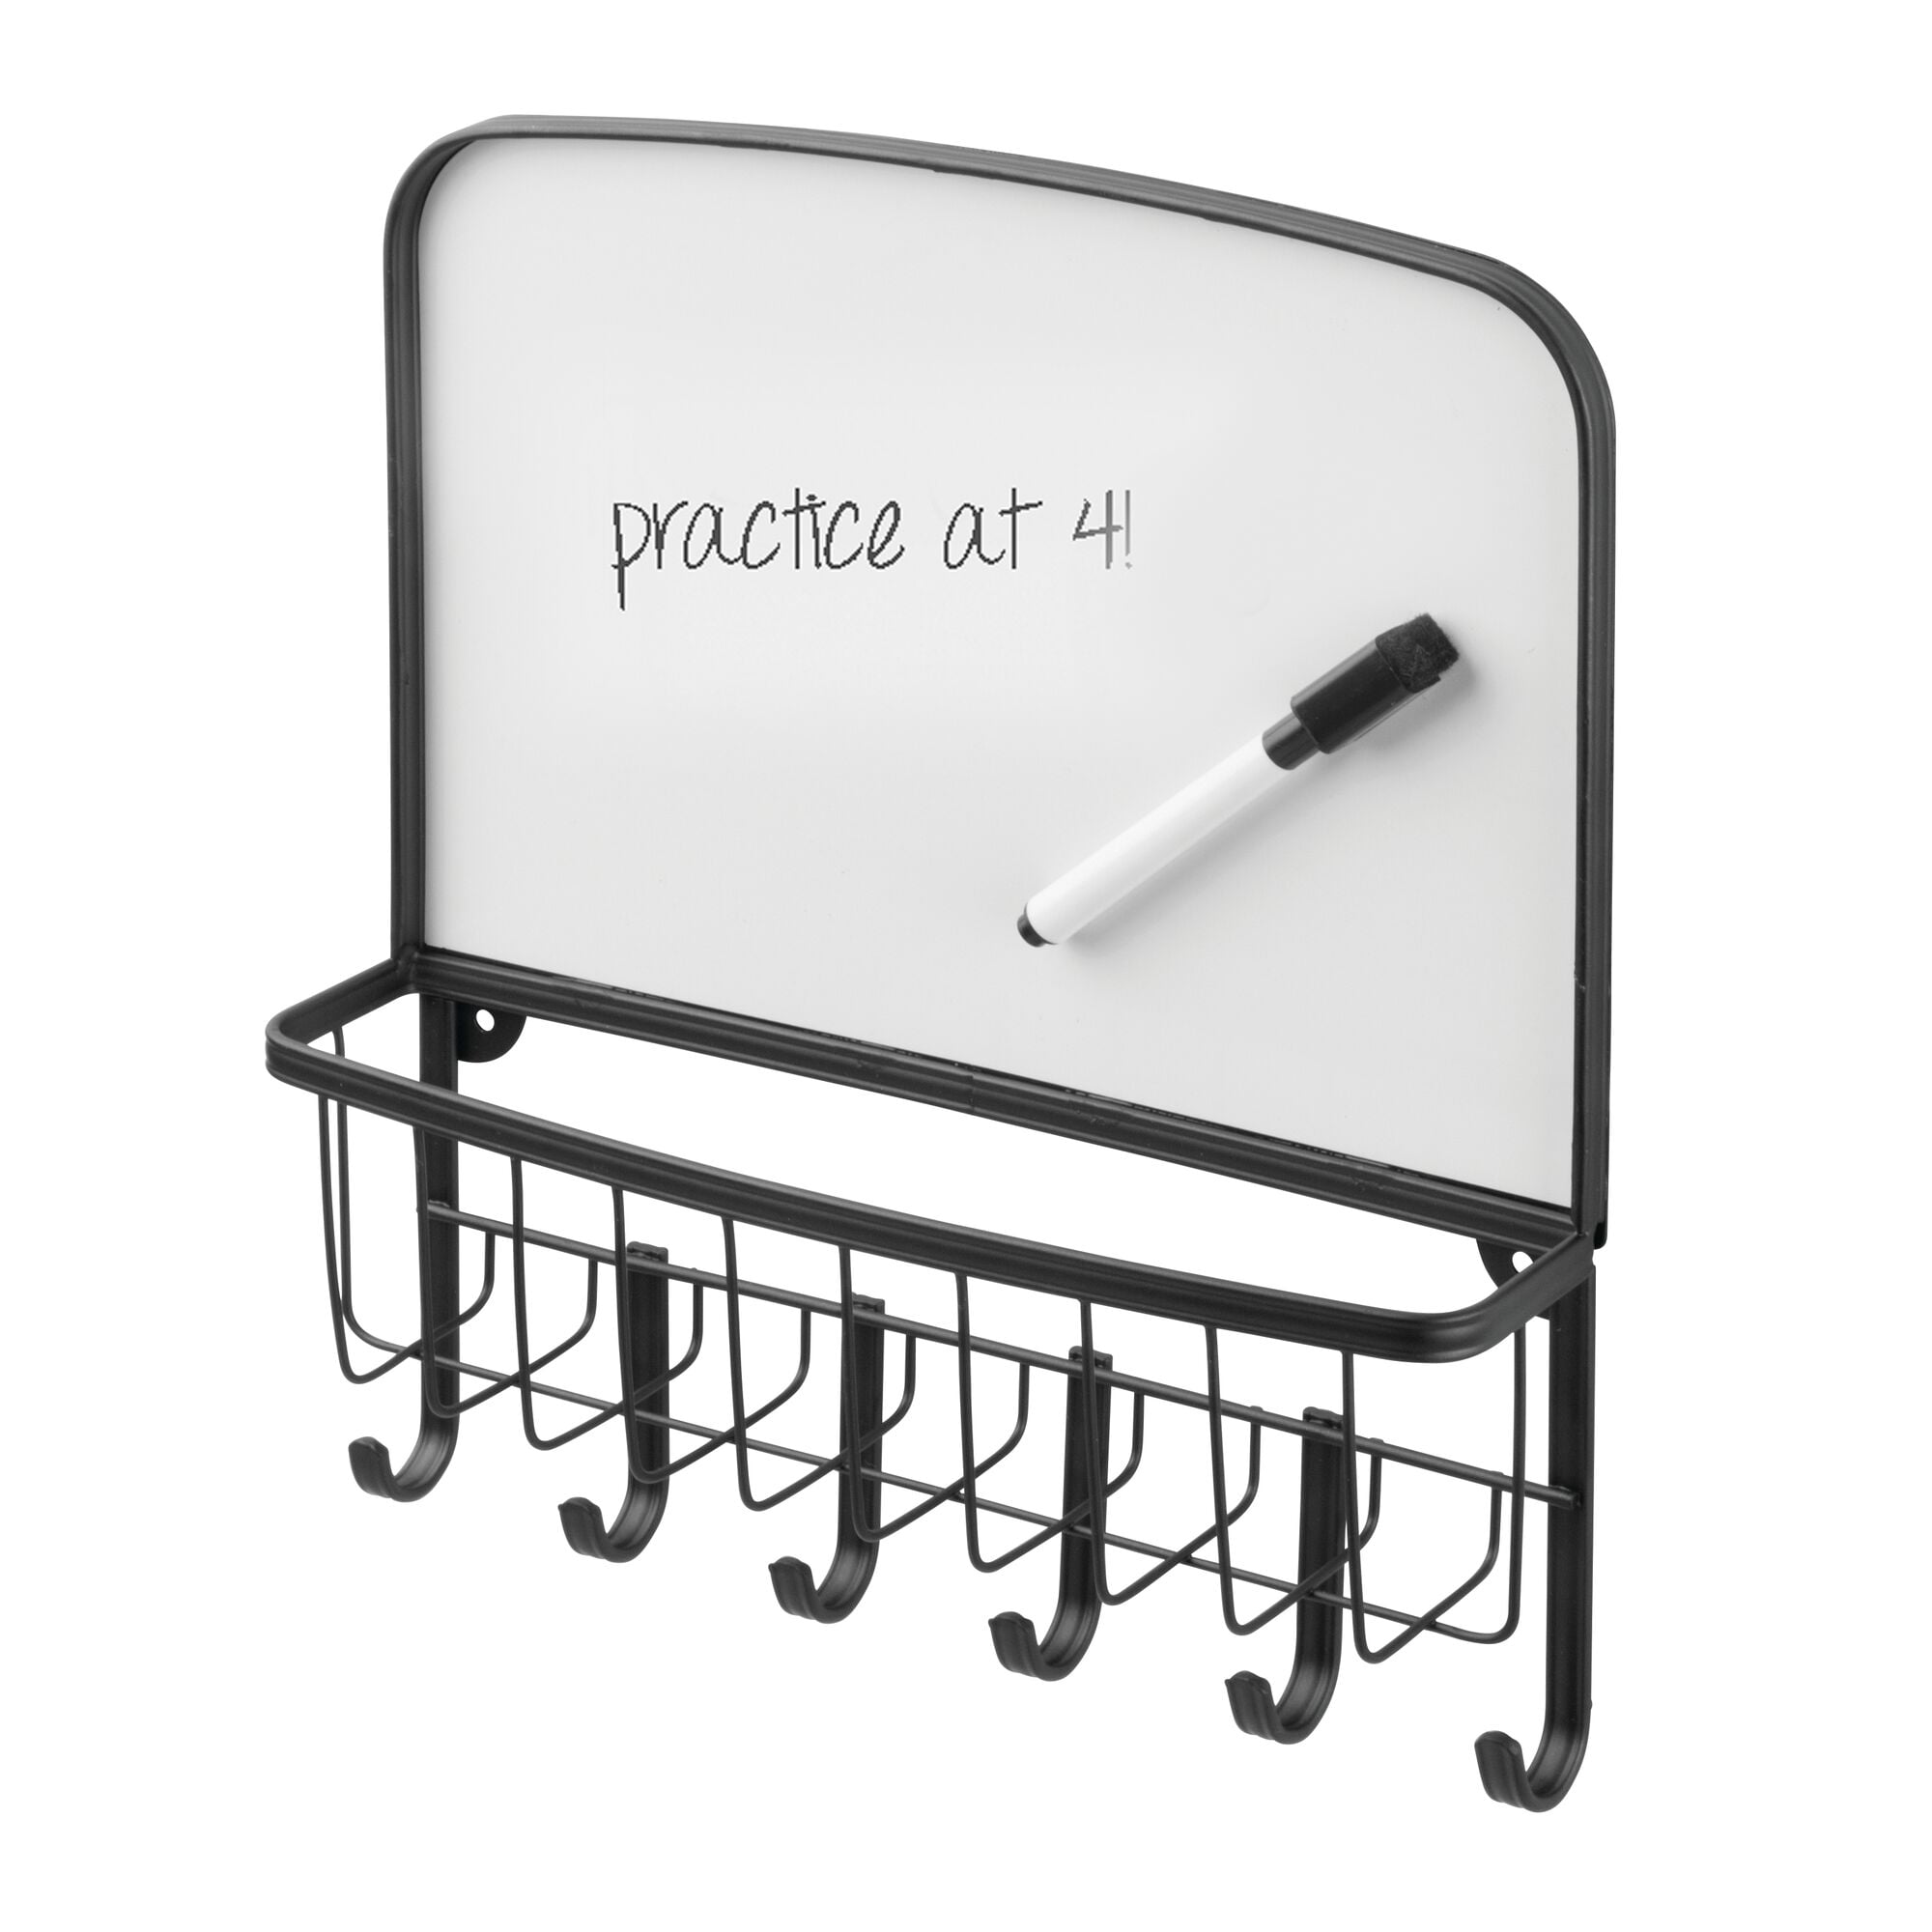 Matte White Keys mDesign Metal Wall Mount Entryway Leashes Coats Office Storage Organizer Mail Basket with Dry Erase Board Strong Steel Wire Design Holds Letters 6 Hooks Magazines